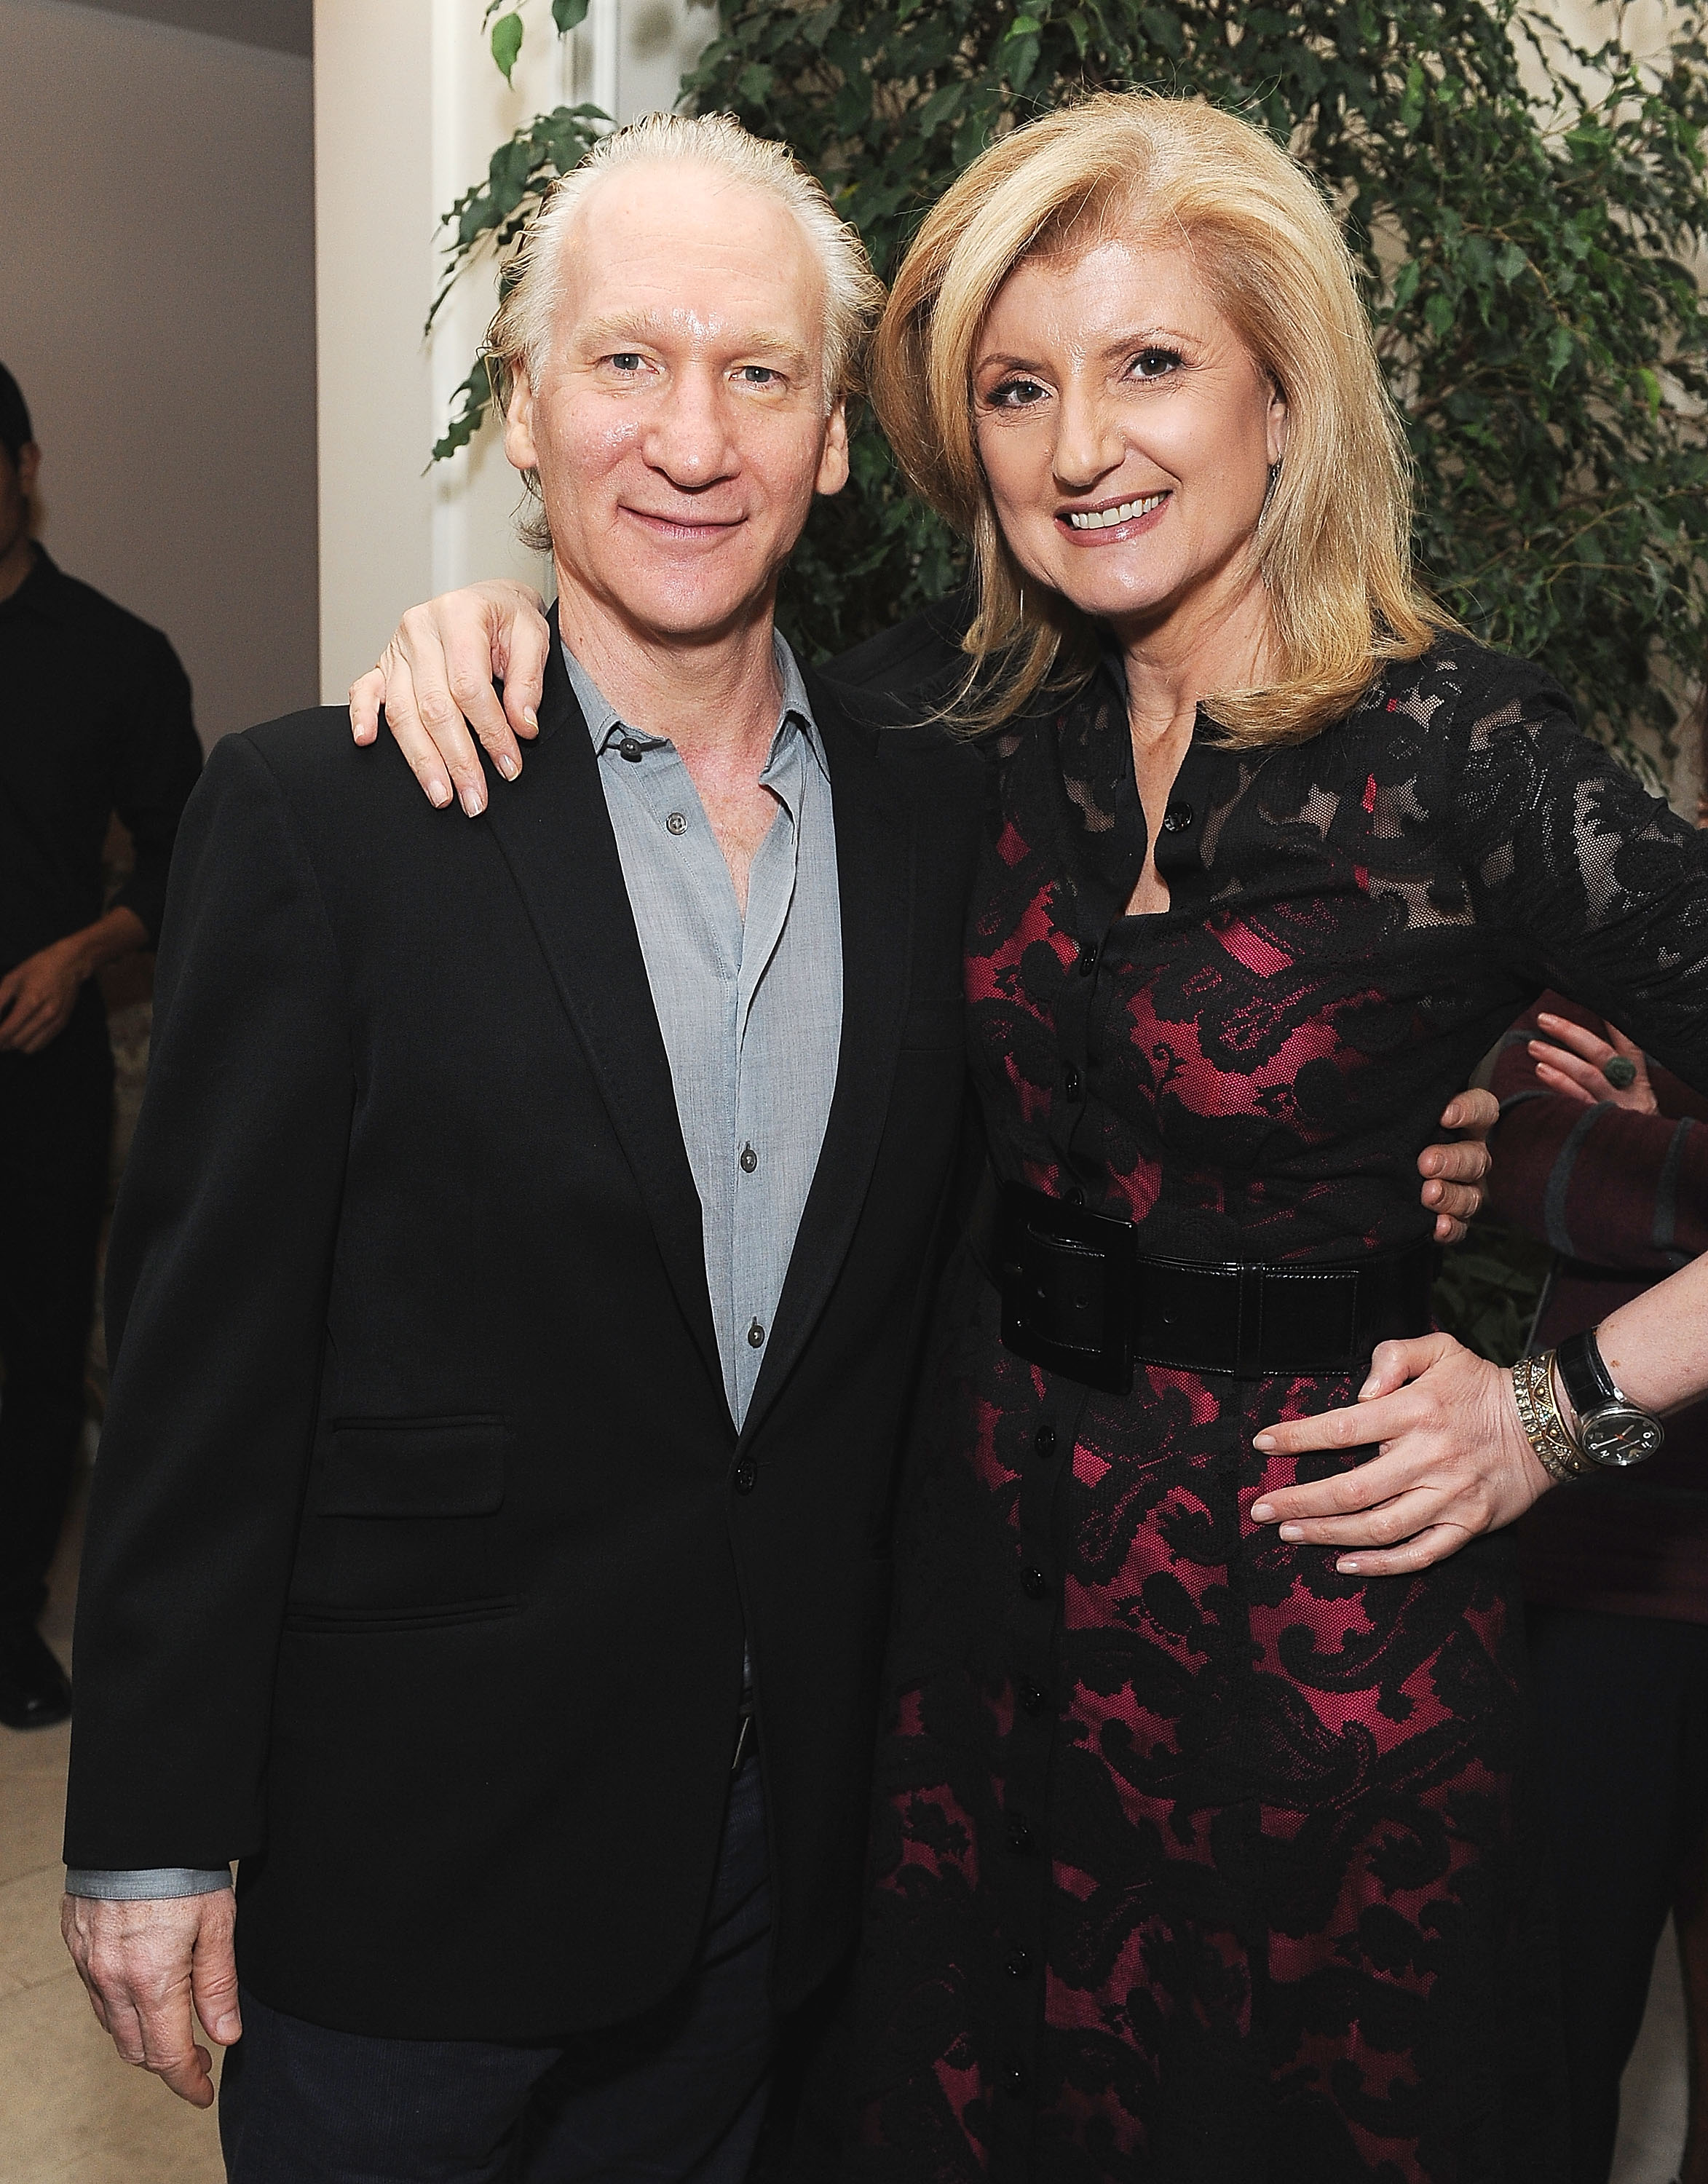 Bill Maher and Arianna Huffington at the "Young Adult" Screening Q&A on November 22, 2011 | Source: Getty Images